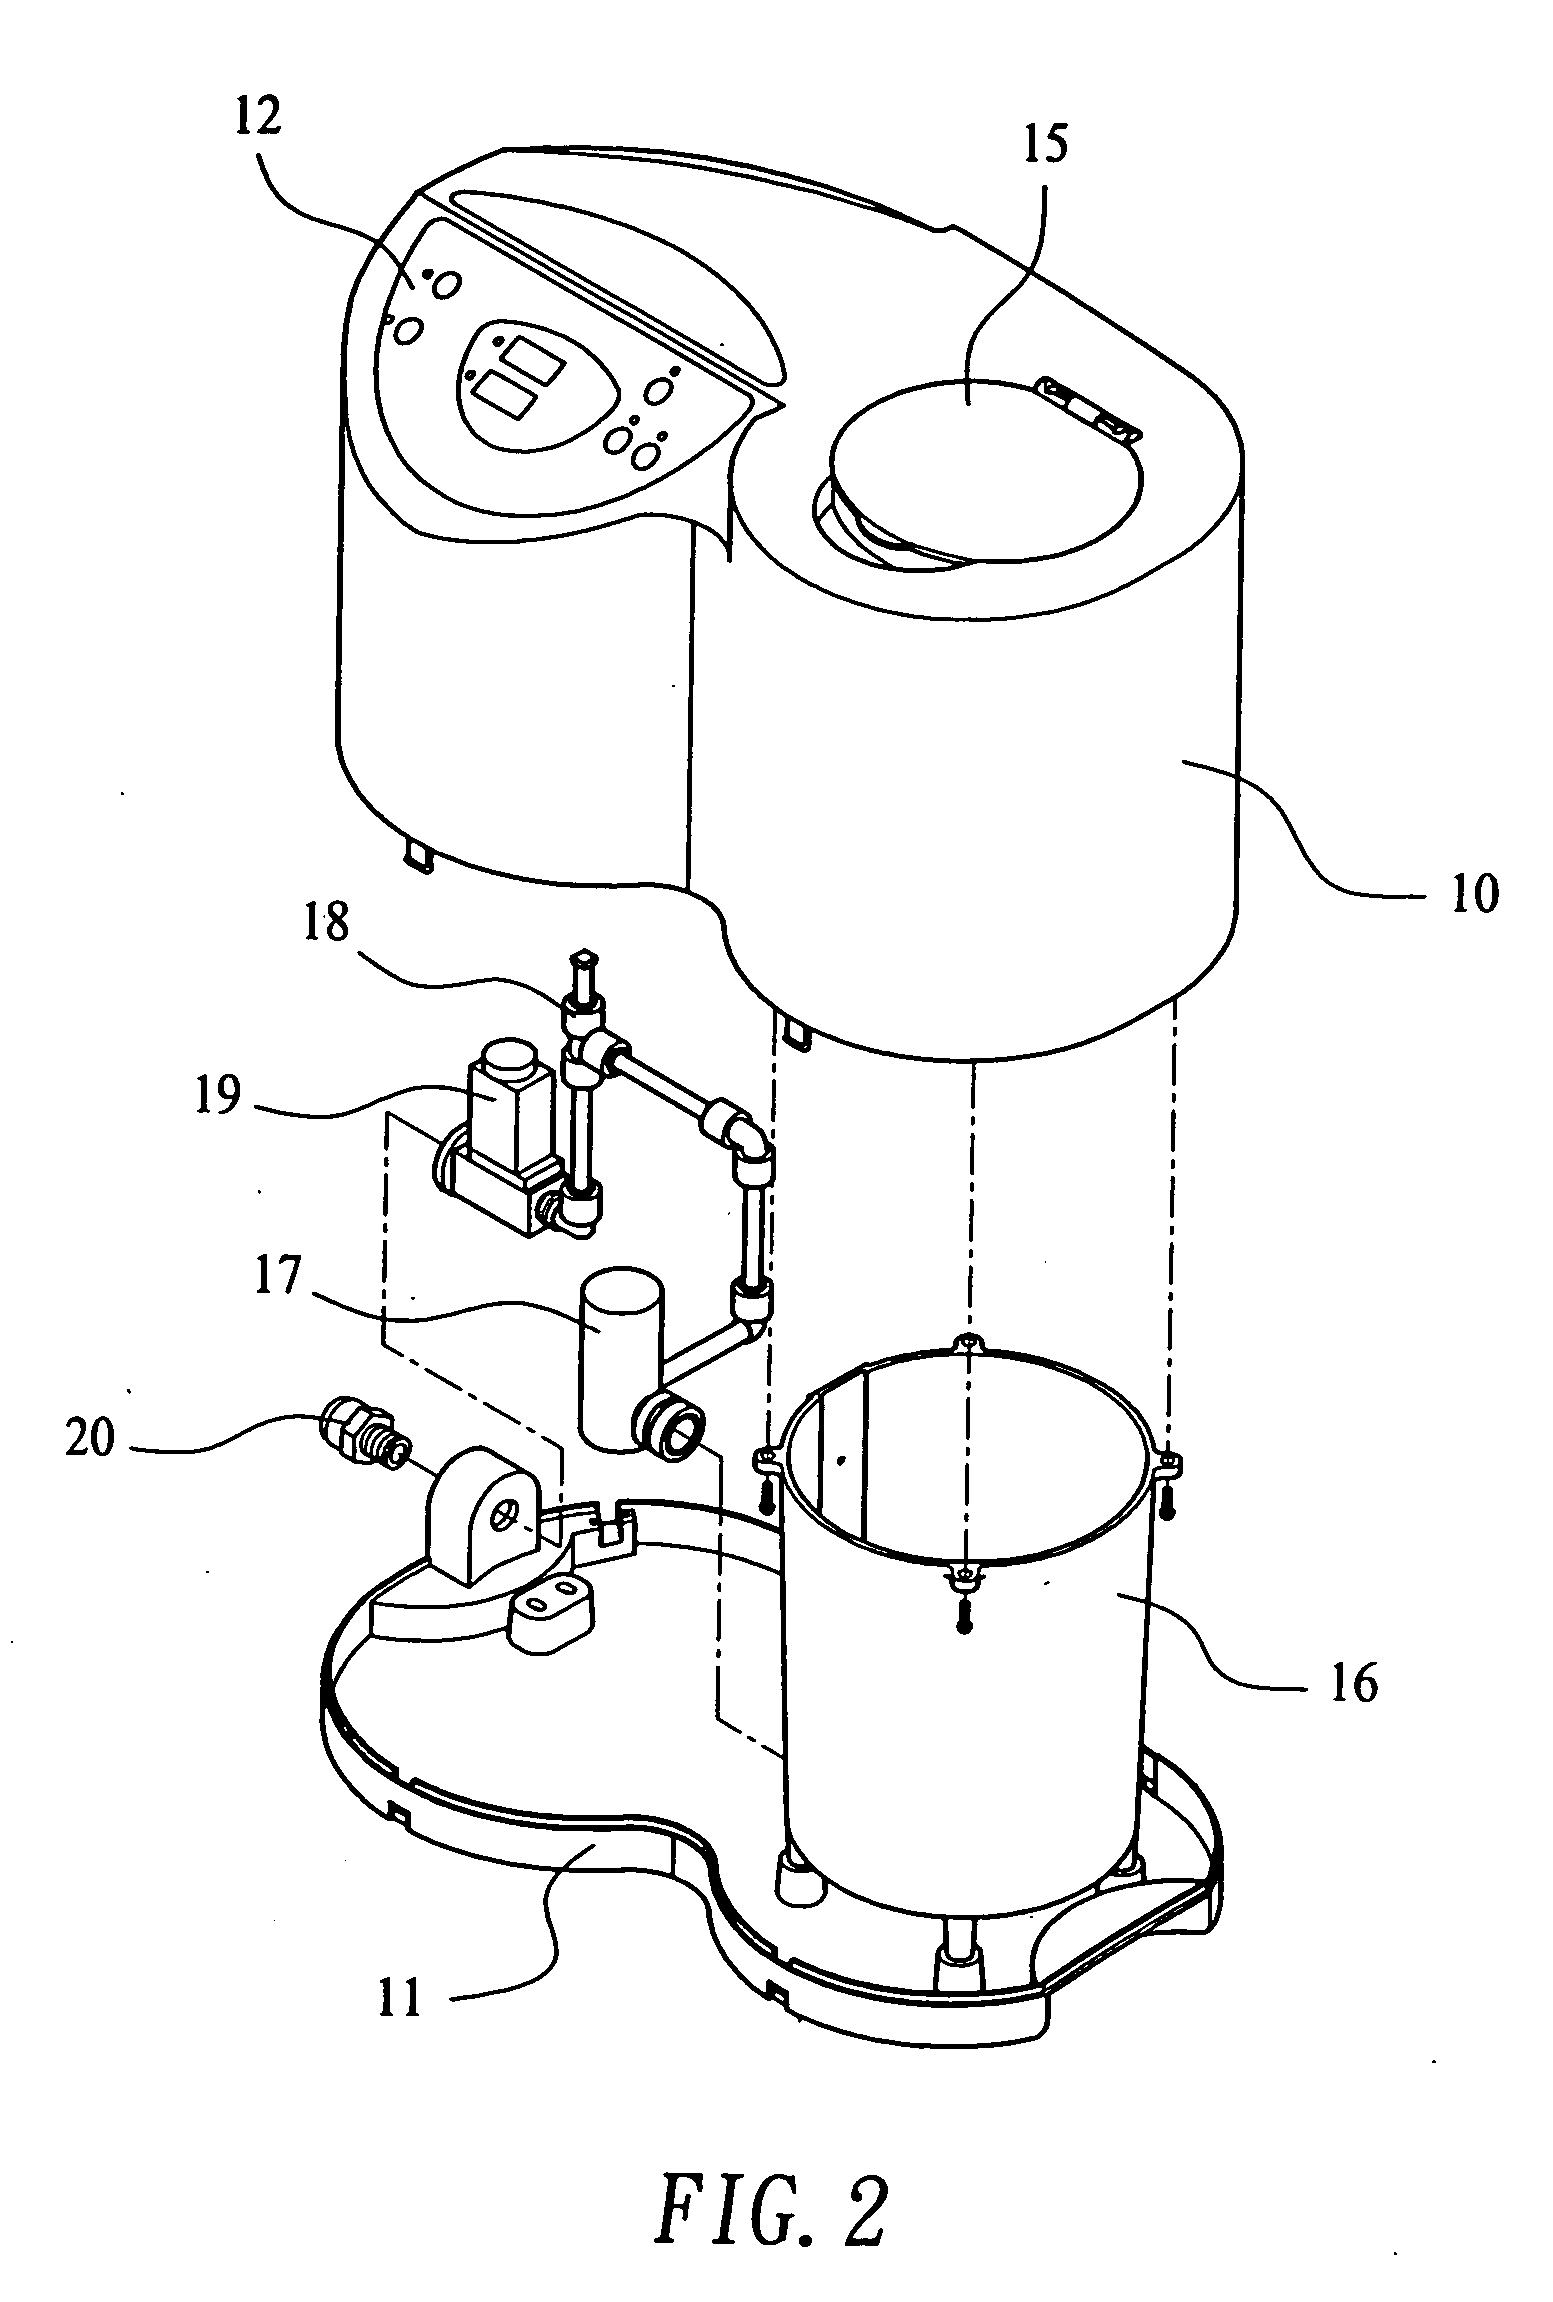 Household-type colon hydrotherapy apparatus